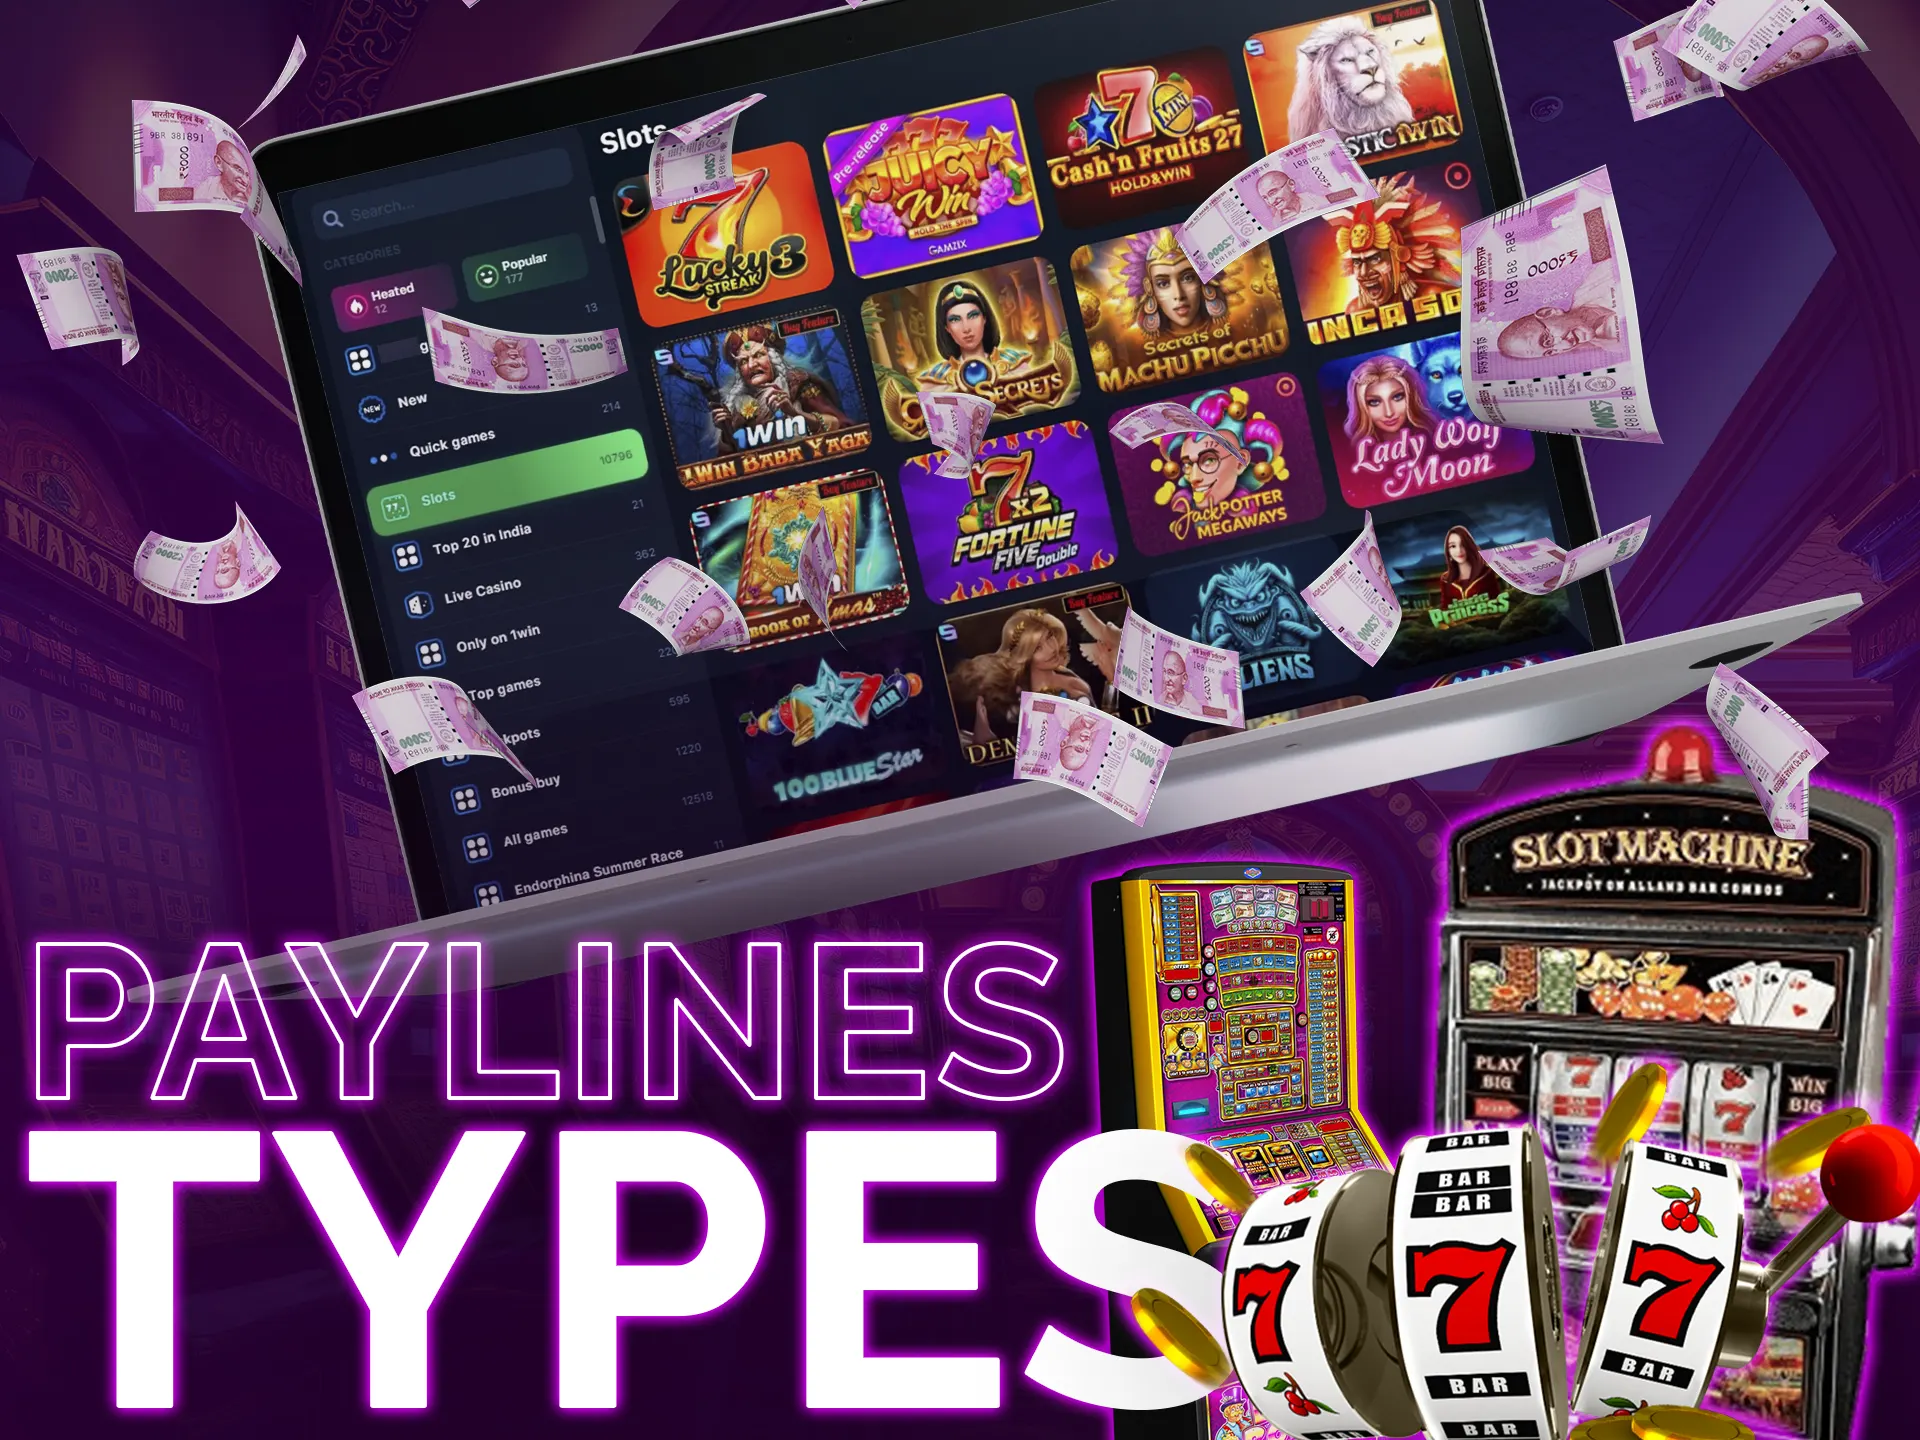 Slots vary by paylines, they can be categorized into five groups based on formation methods.